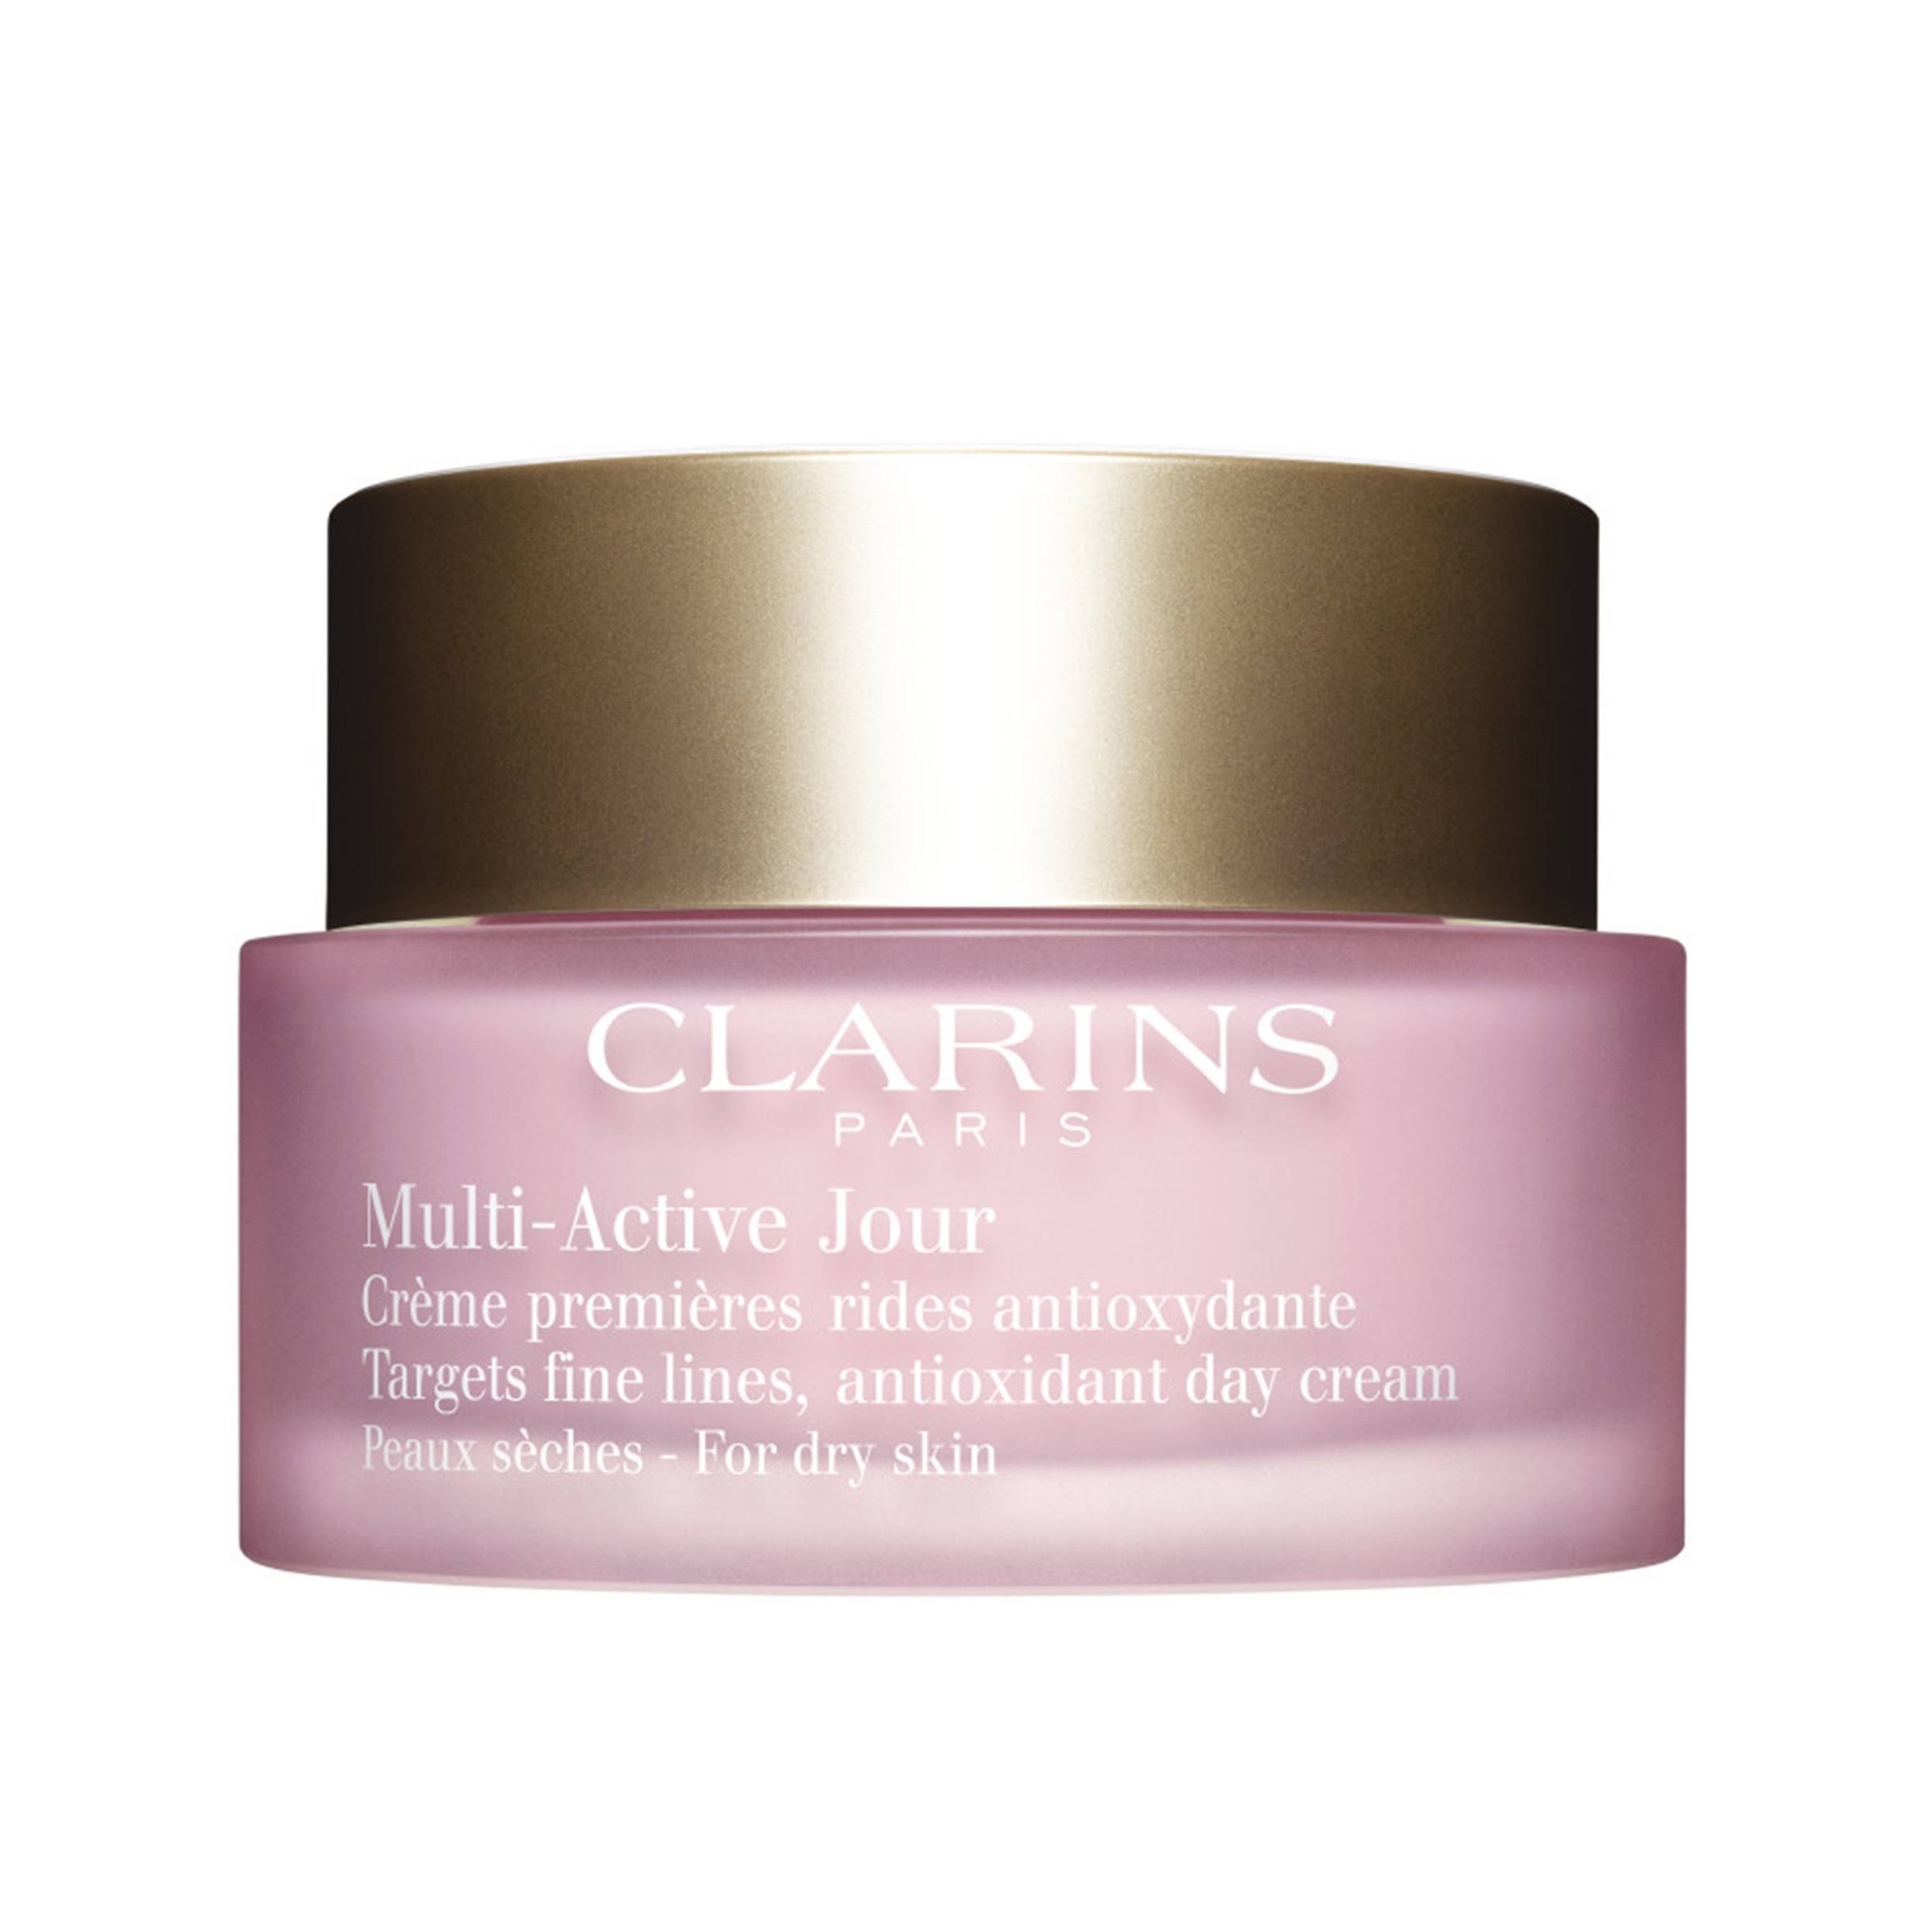 Clarins Multi-Active Day Cream for Dry Skin - 50ml